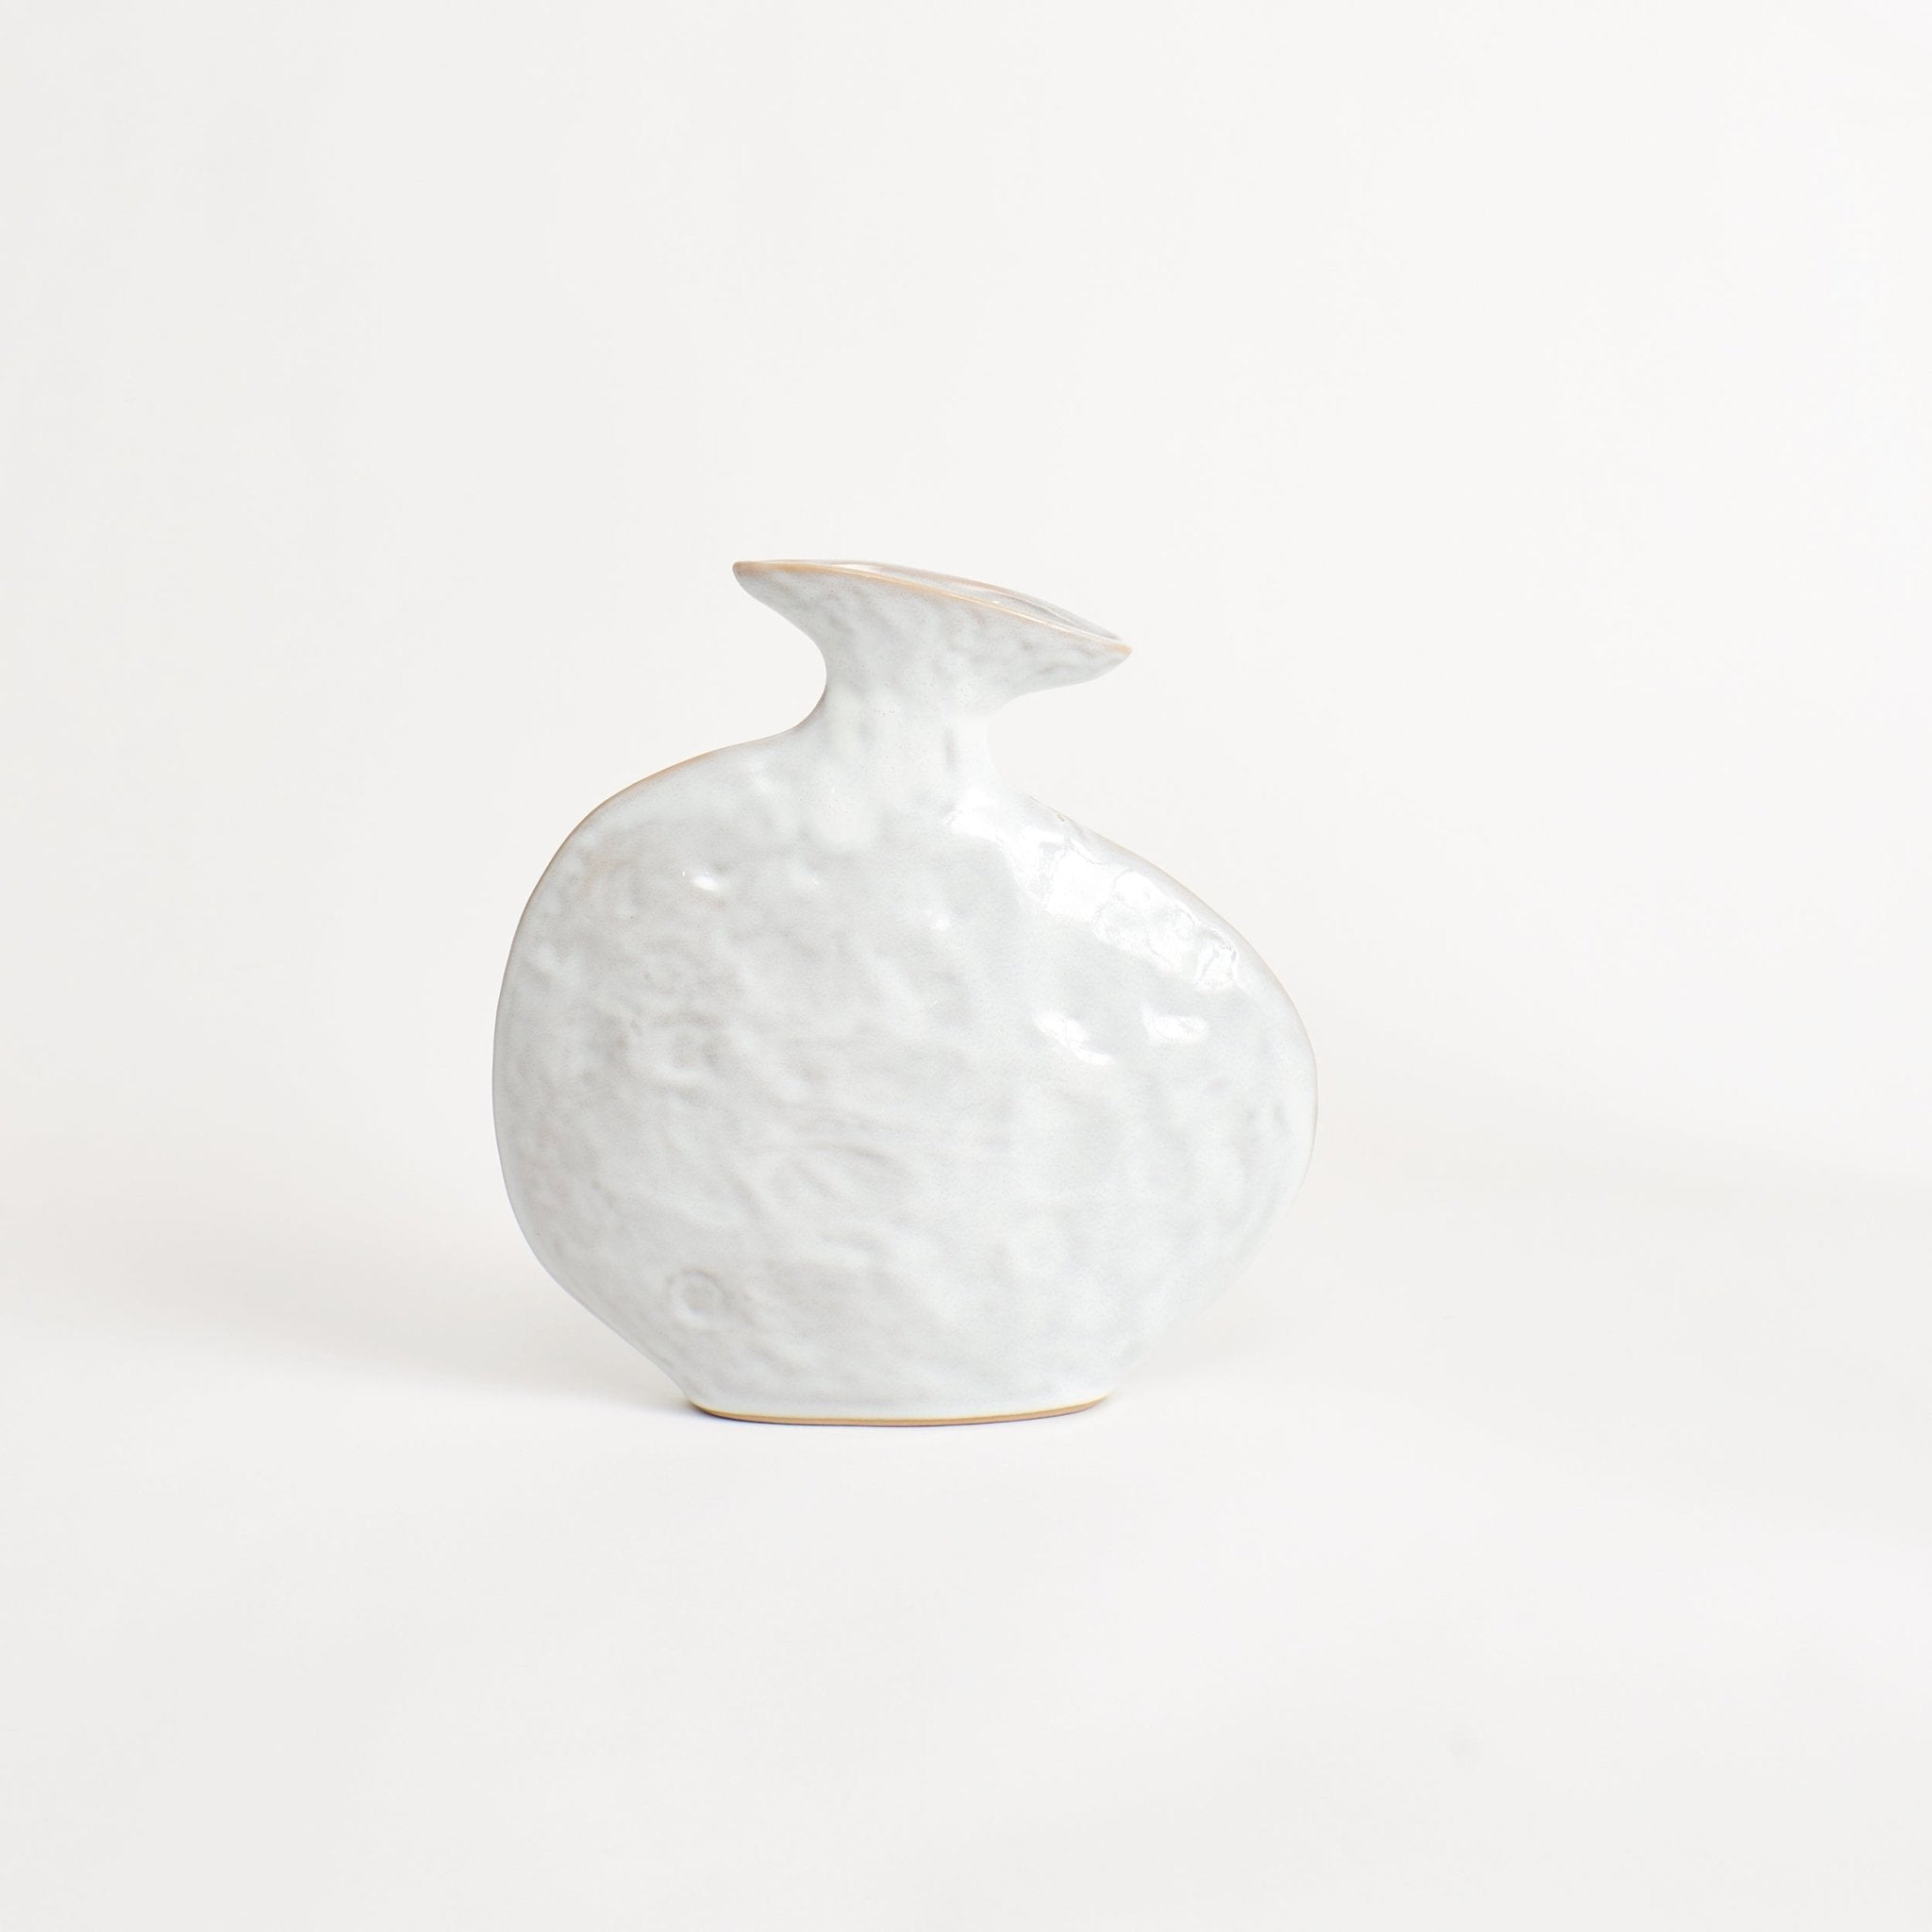 Flat Vase - White vase from Project 213A